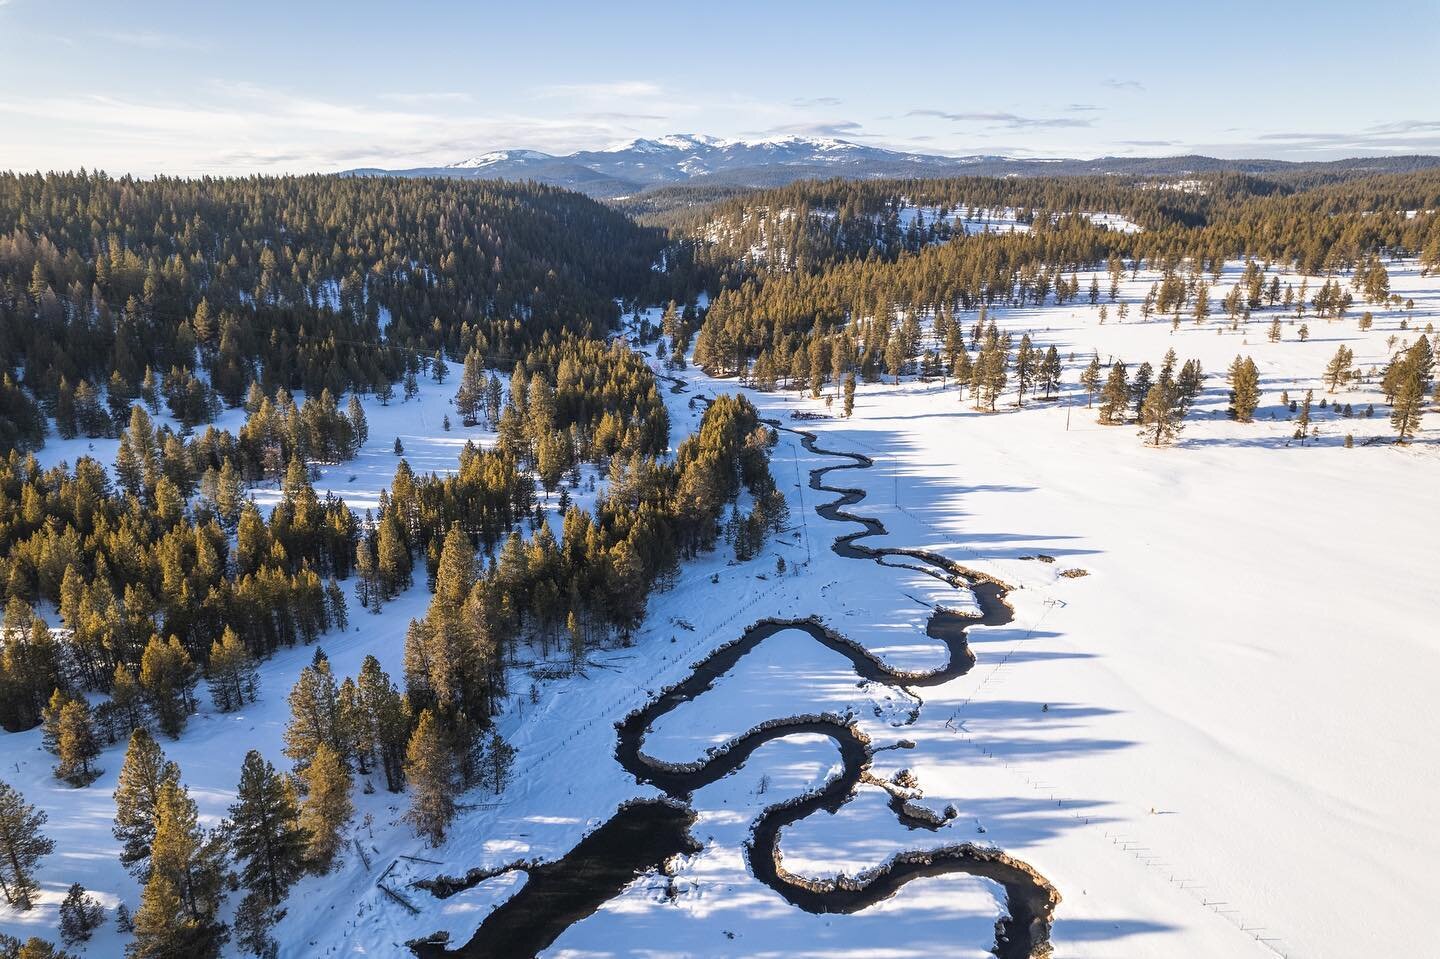 Time for a recharge. The headwaters of the Middle Fork John Day River at Phipps Meadow.⁠
⁠
📸: @mattfranklinphoto 
⁠
-⁠
-⁠
-⁠
#river #johndayriver #winter #river #forest #rivers #headwaters #outside #conservation #nature #landscape #photography #aeri